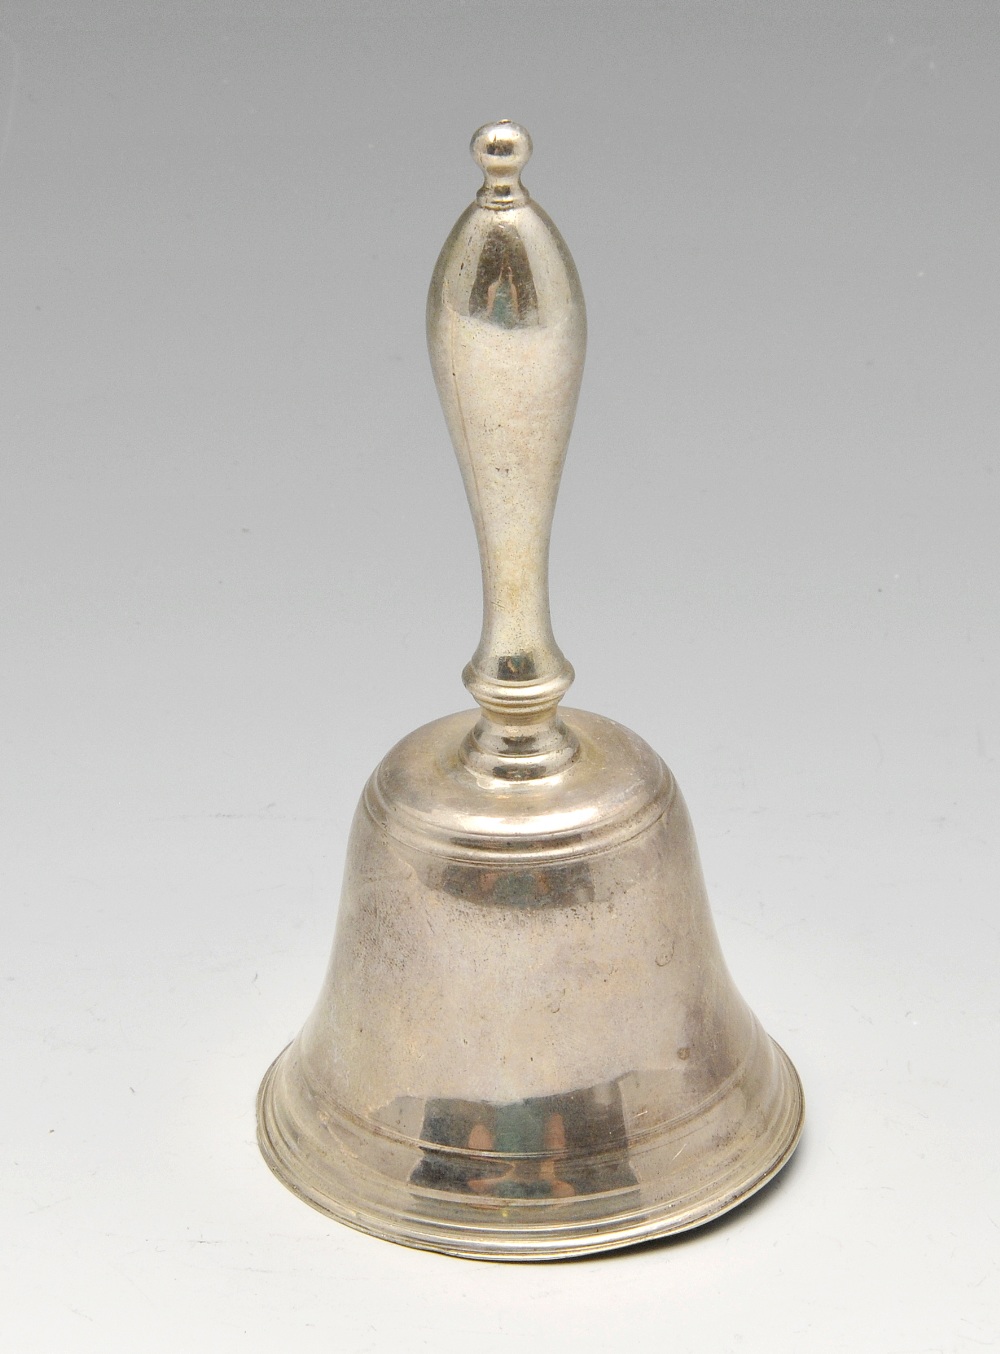 A Victorian silver table bell of classic form with baluster handle. Hallmarked H J Lias & Son (Henry